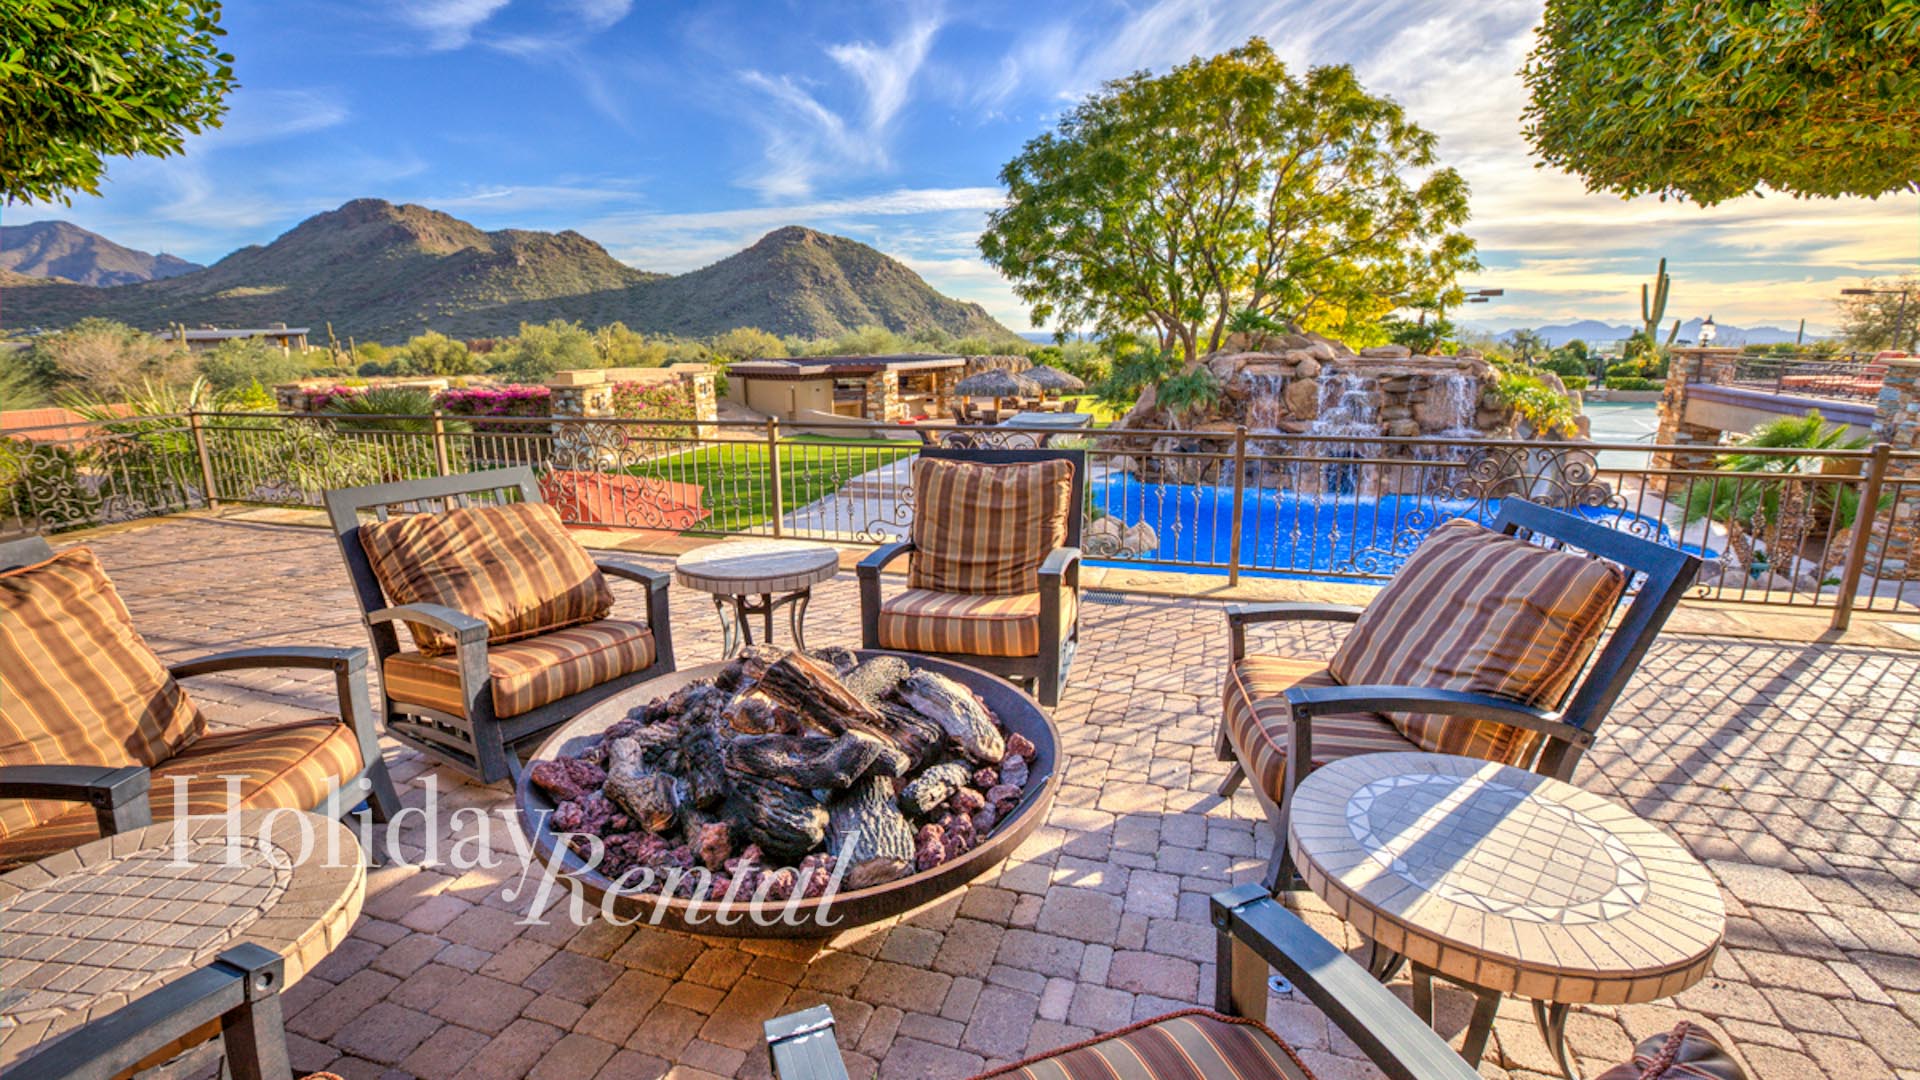 Fire pit with mountain views